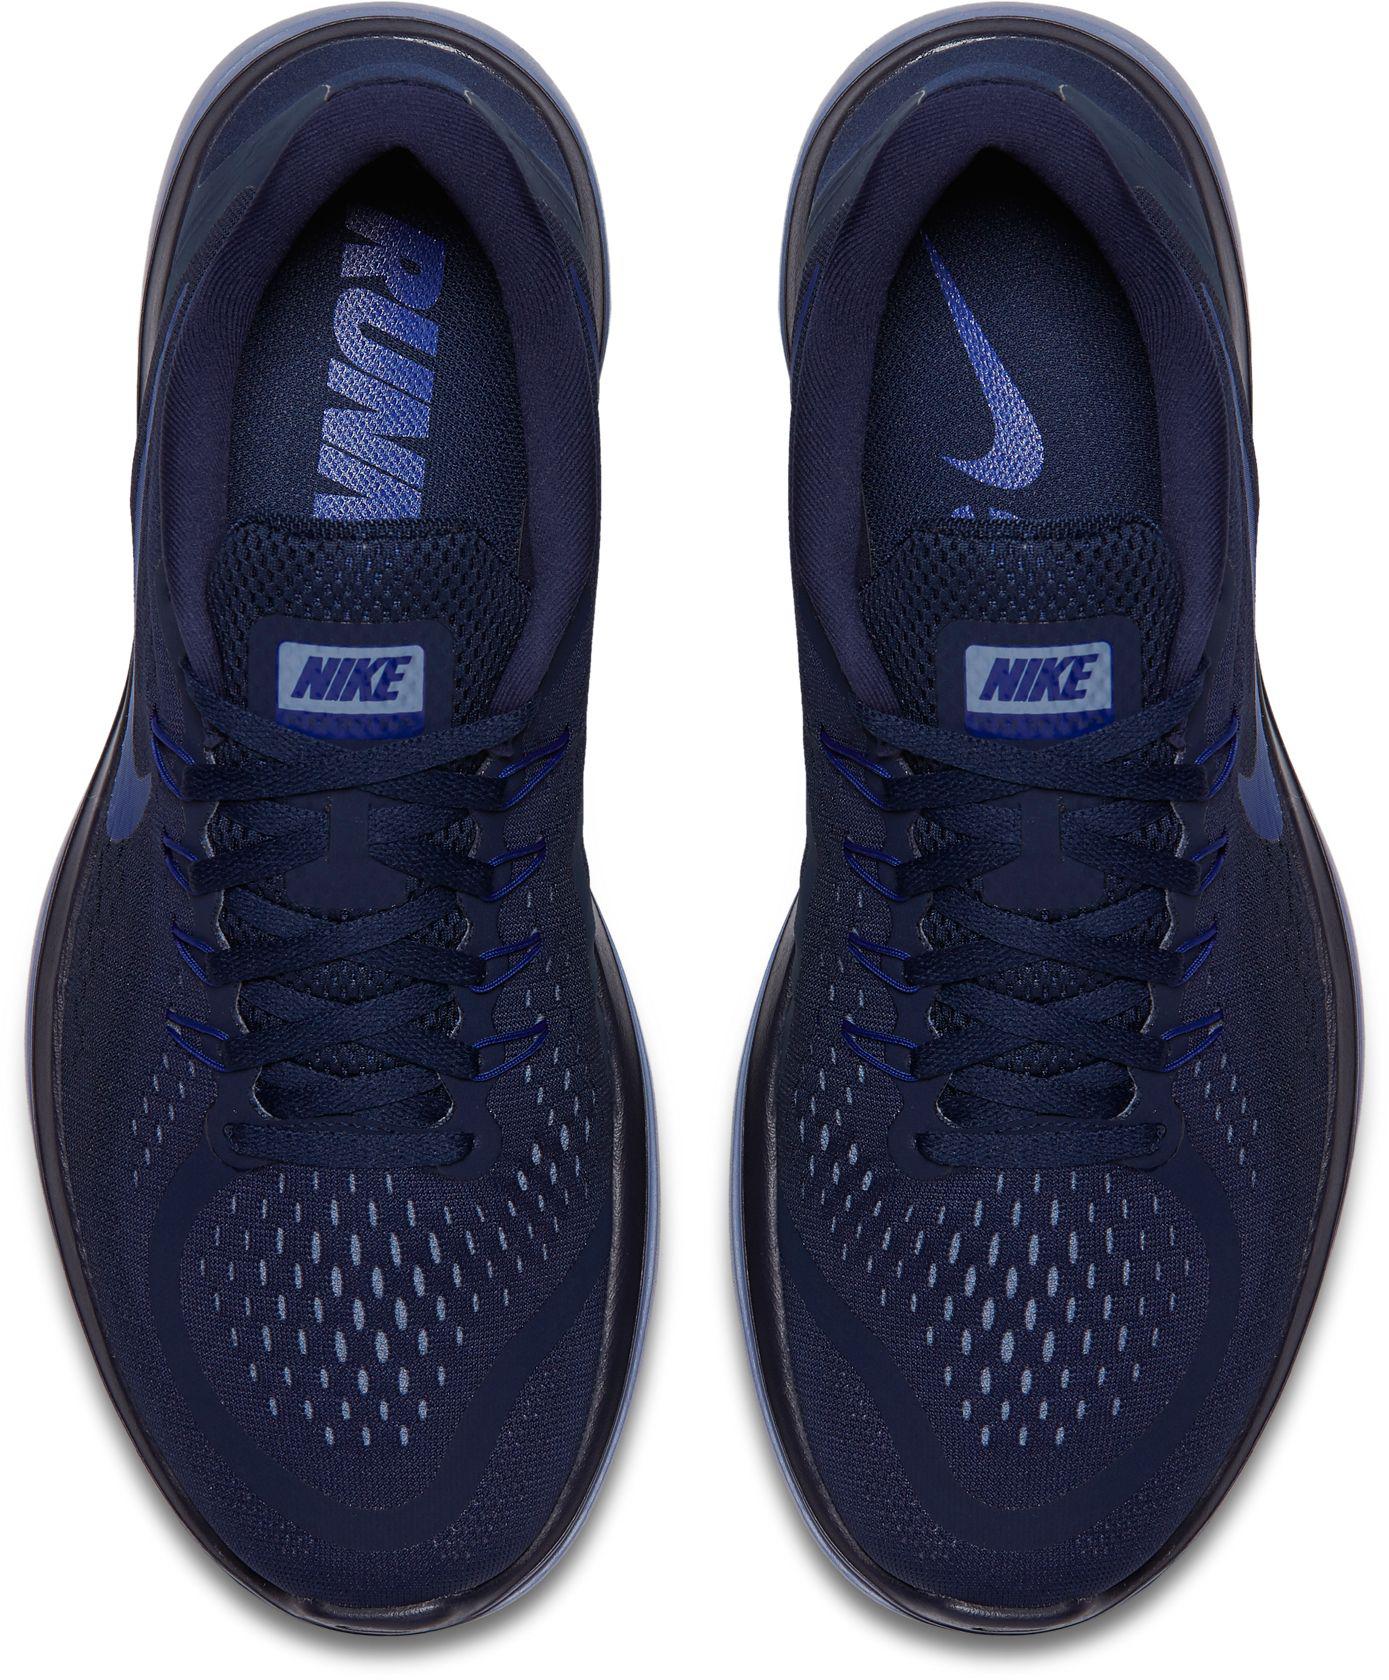 Nike Flex 2017 Rn Running Shoes in Navy Blue (Blue) for